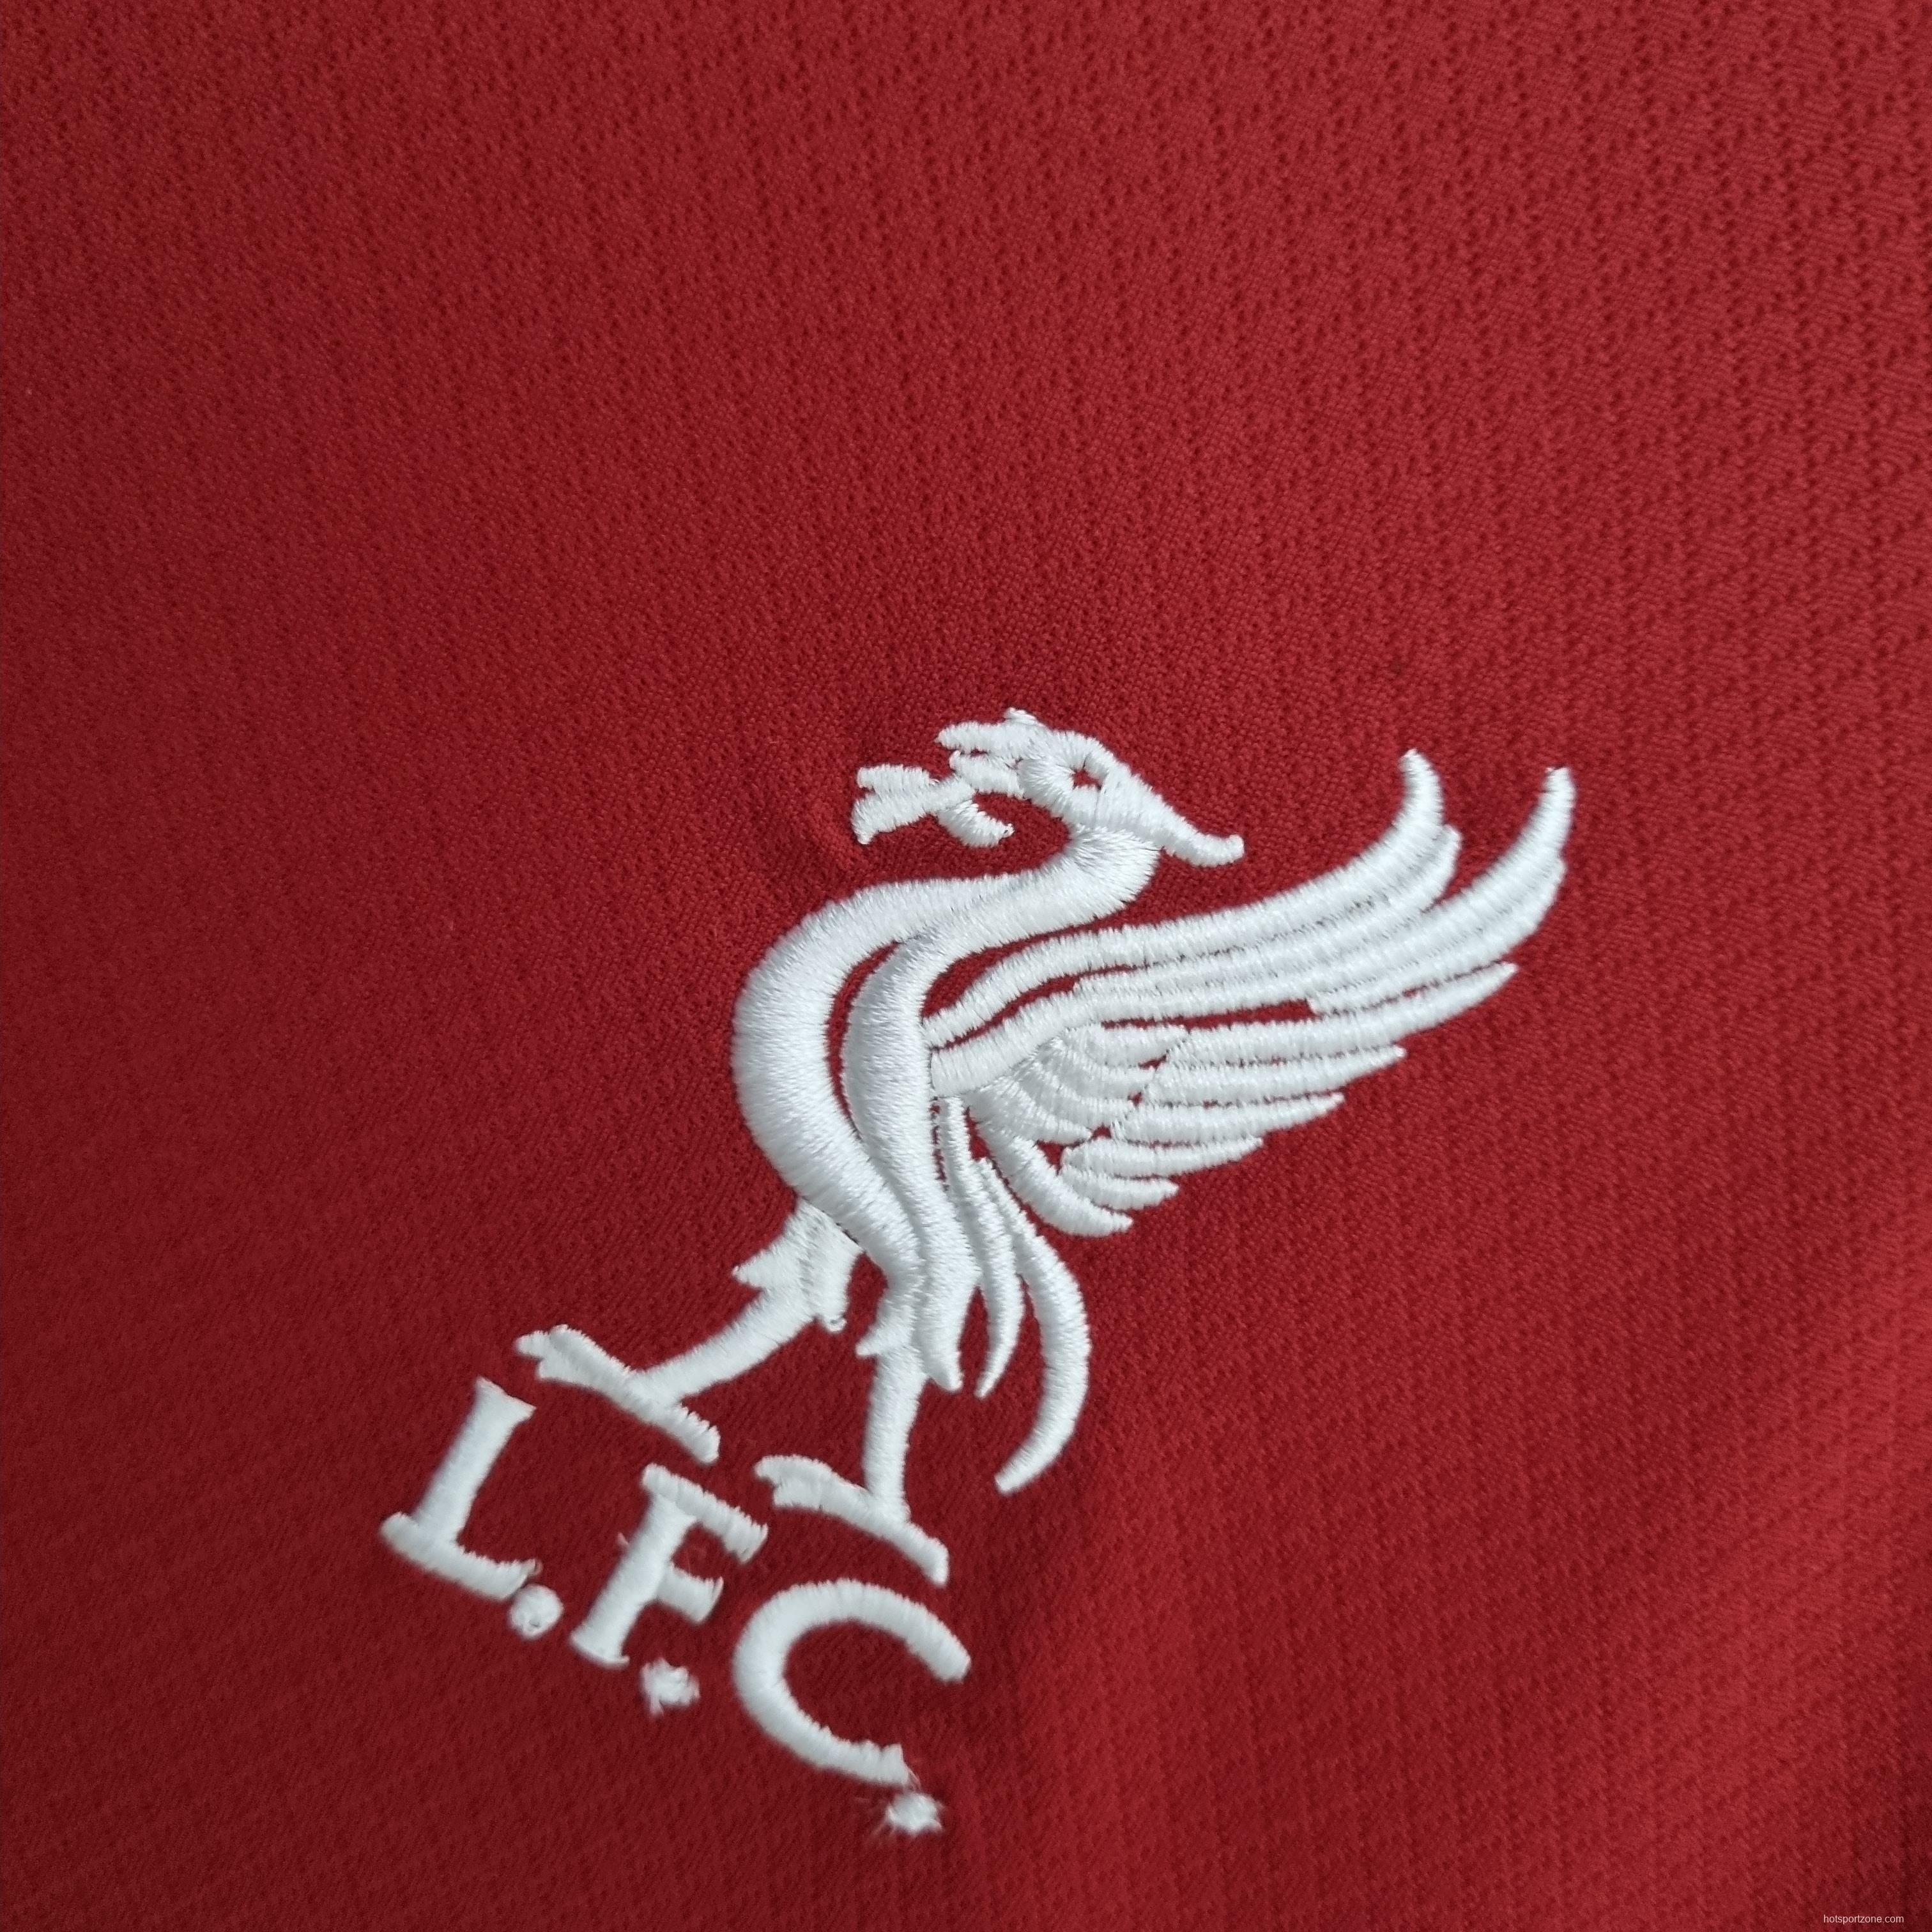 22/23 Liverpool Home Soccer Jersey